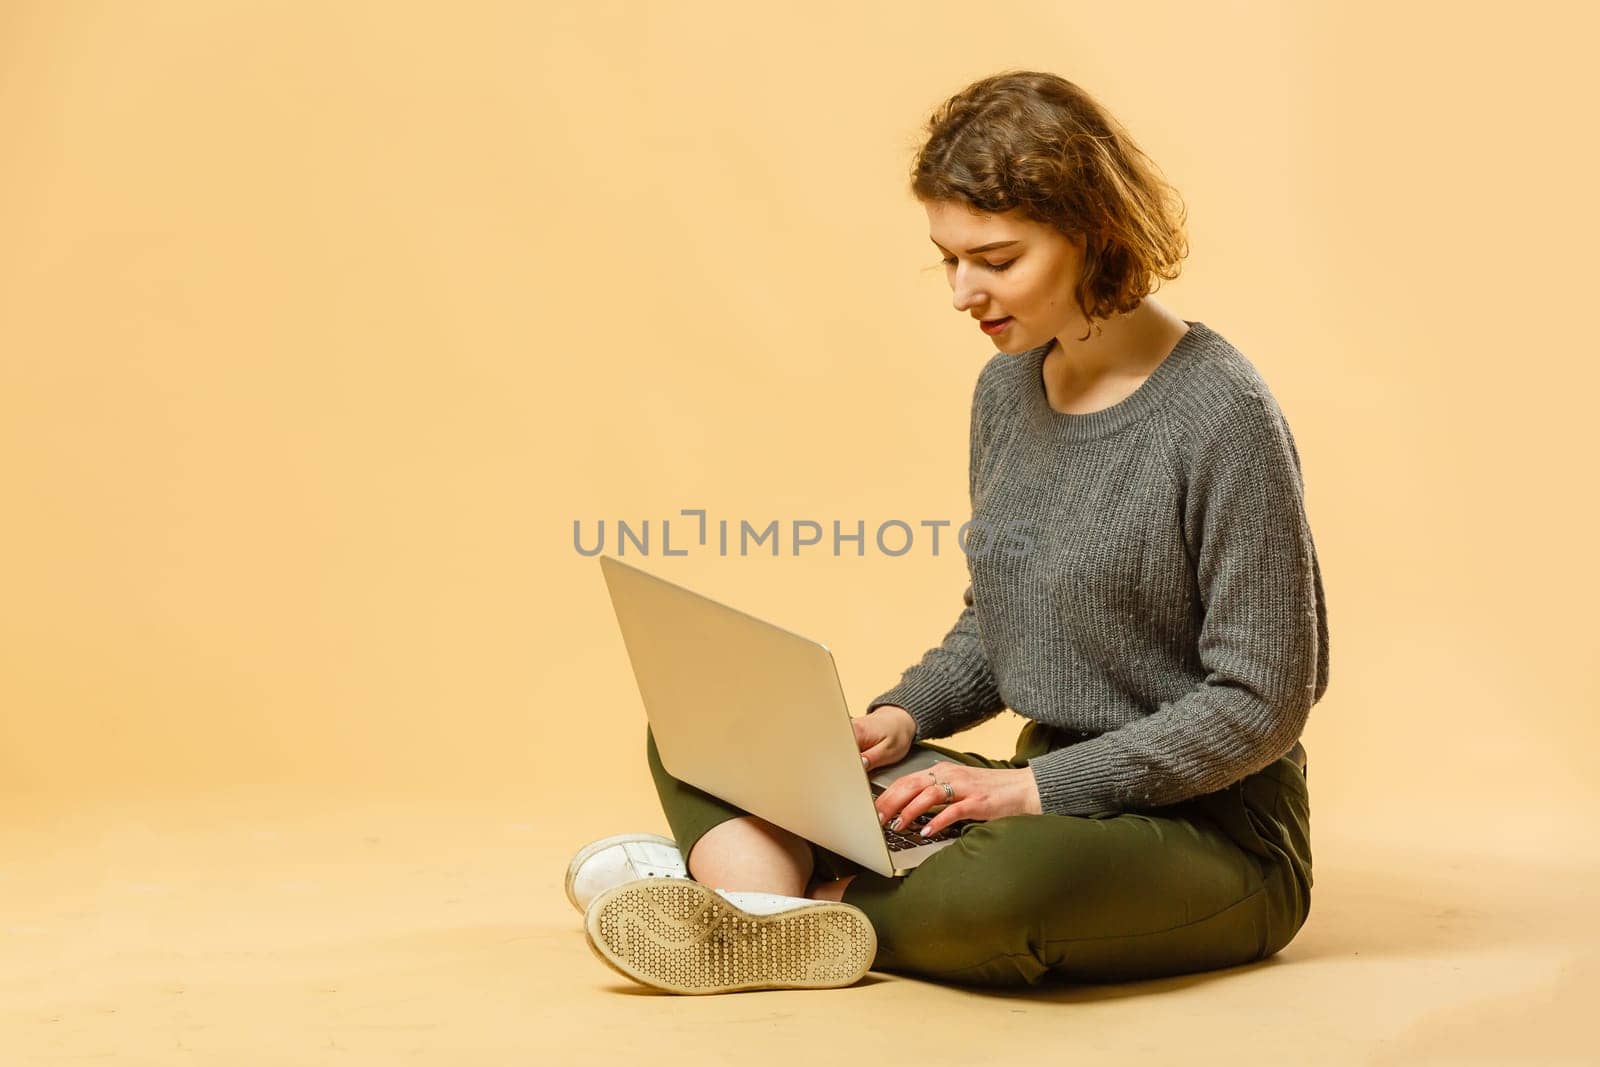 Smiling cheerful funny beautiful attractive young brunette woman 20s wearing basic casual working on laptop pc computer isolated on bright beige colour background studio portrait by Andelov13